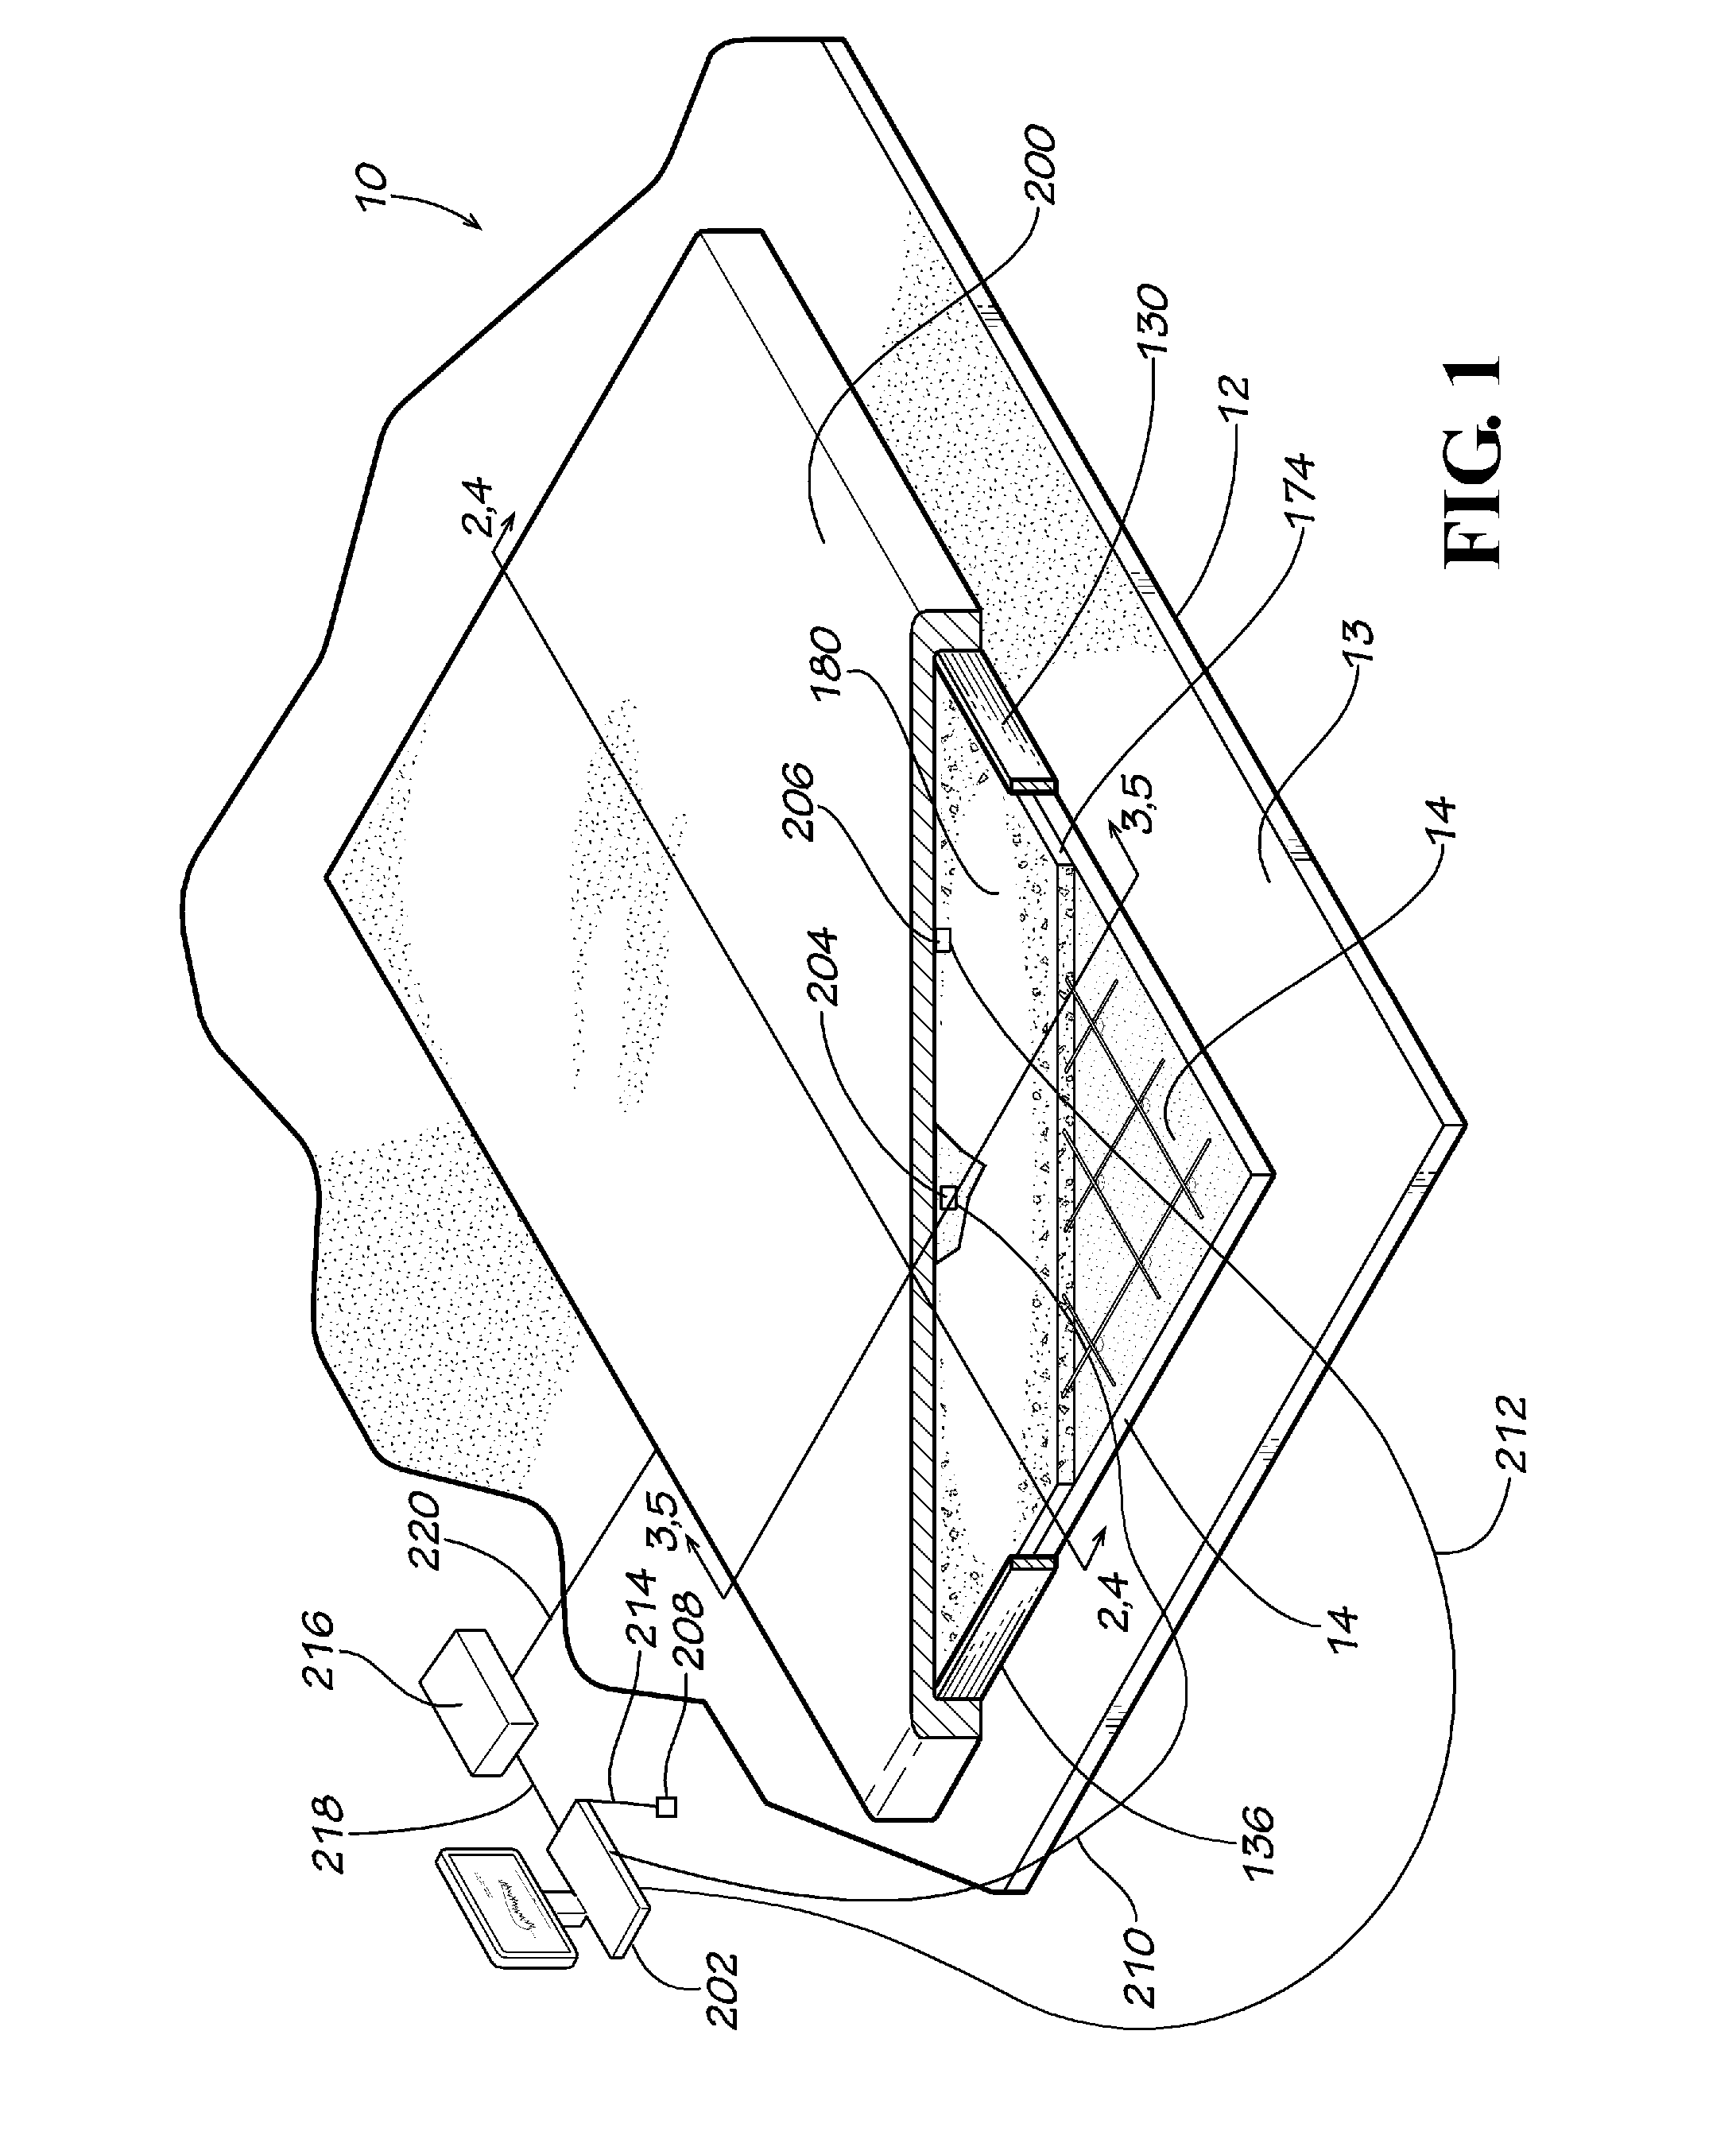 Method for electronic temperature controlled curing of concrete and accelerating concrete maturity or equivalent age of precast concrete structures and objects and apparatus for same